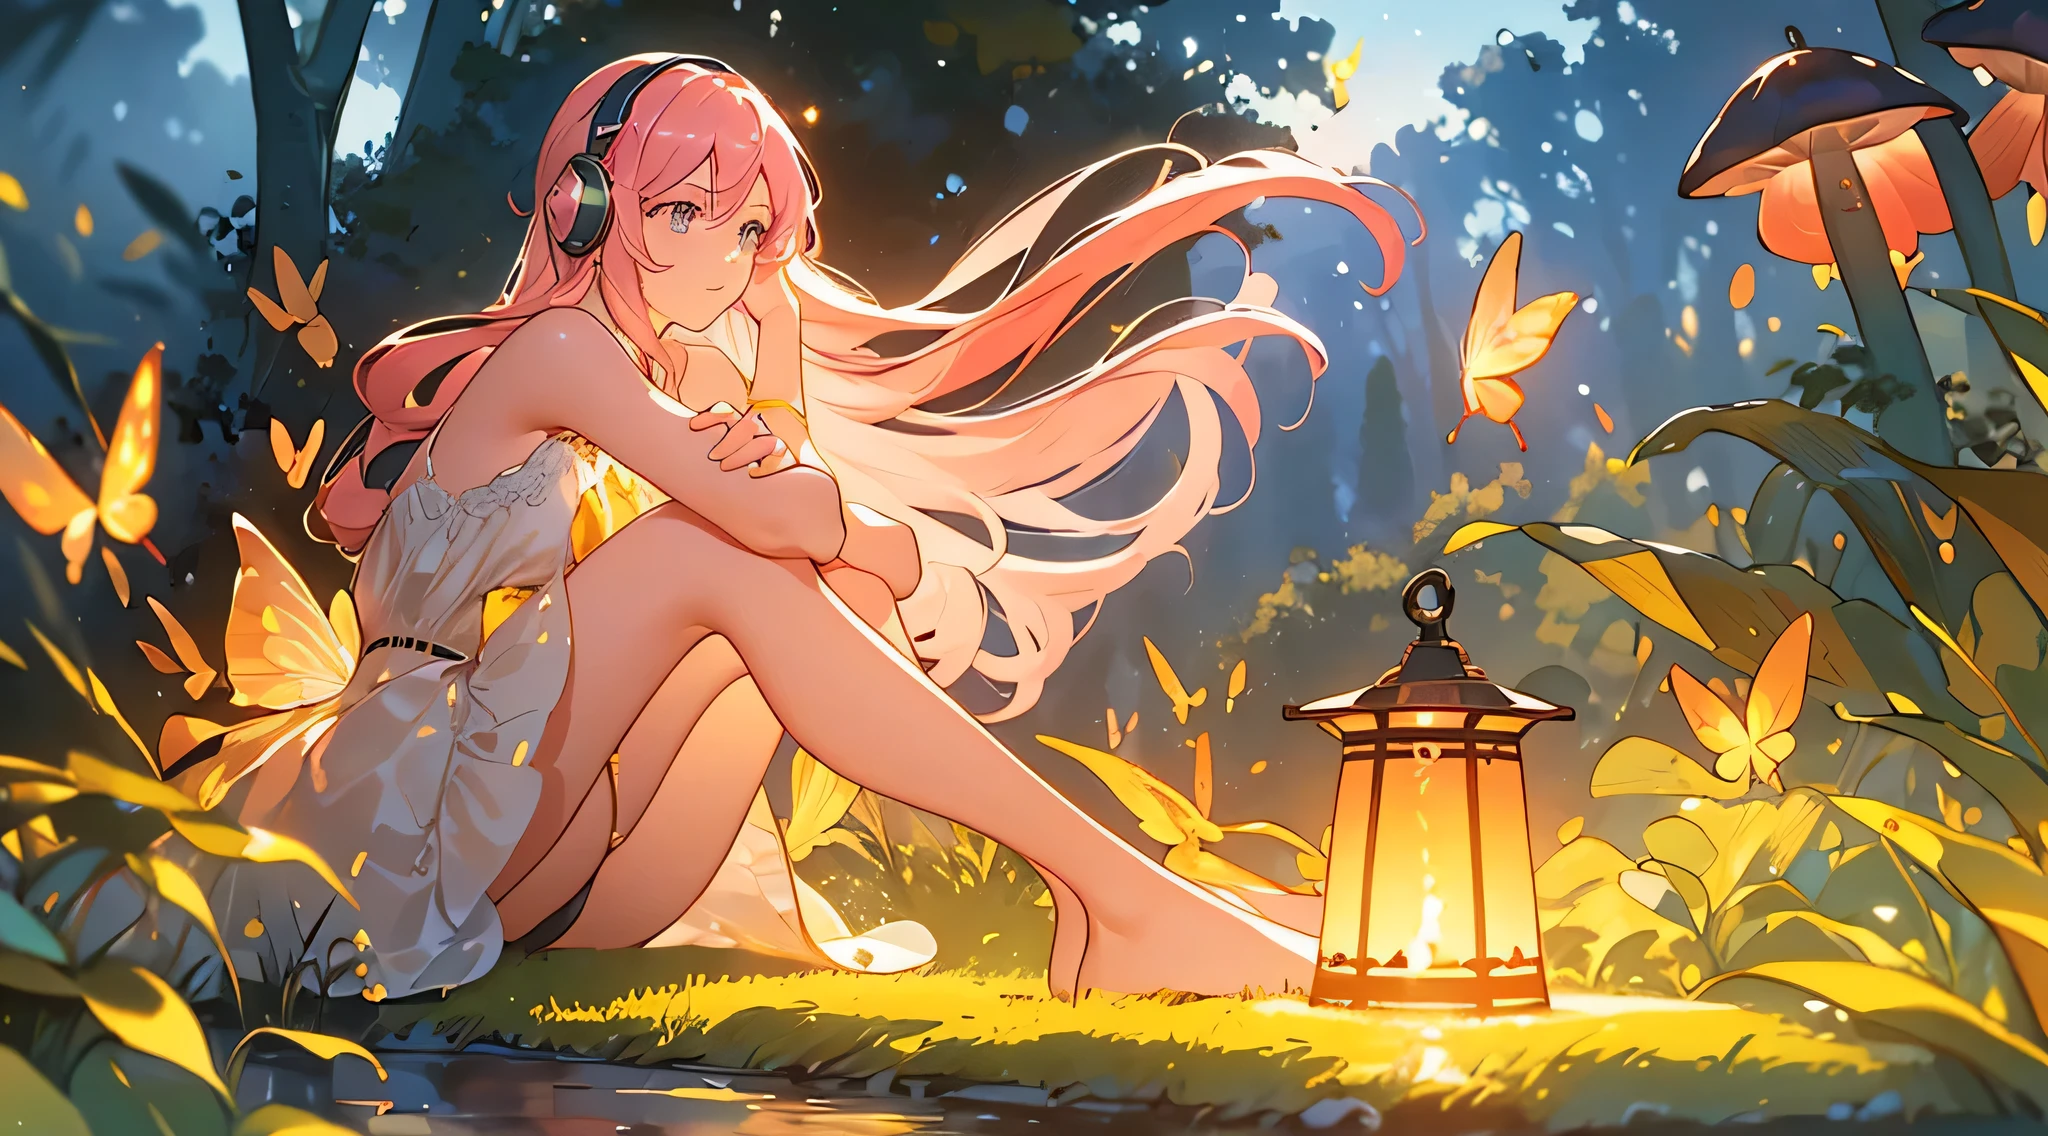 1girl,1headphone,alone,single,solo,only one,one character,(((Personage as the main perspective))),(((character in the middle))),((masterpiece)),((best quality)),(ultra-detailed),(illustration),clear-cut margin,alphonse mucha,extremely detailed CG unity 8k wallpaper,((an extremely delicate and beautiful)),(dynamic angle),An enchanted forest at night illuminated by glowing mushrooms,((Tyndall effect)),(Fluorescent mushroom forests background),1girl,(arms behind back),(beautiful detailed eyes),cute pink eyes,golden pupil,detailed face,upper body,white dress,messy floating pink hair,disheveled hair,focus,(beautiful water),river,flying butterfly,sunlight,shine,chiaroscuro,ray_tracing,(painting),[[[[[[8 k artistic photography]]]]]],